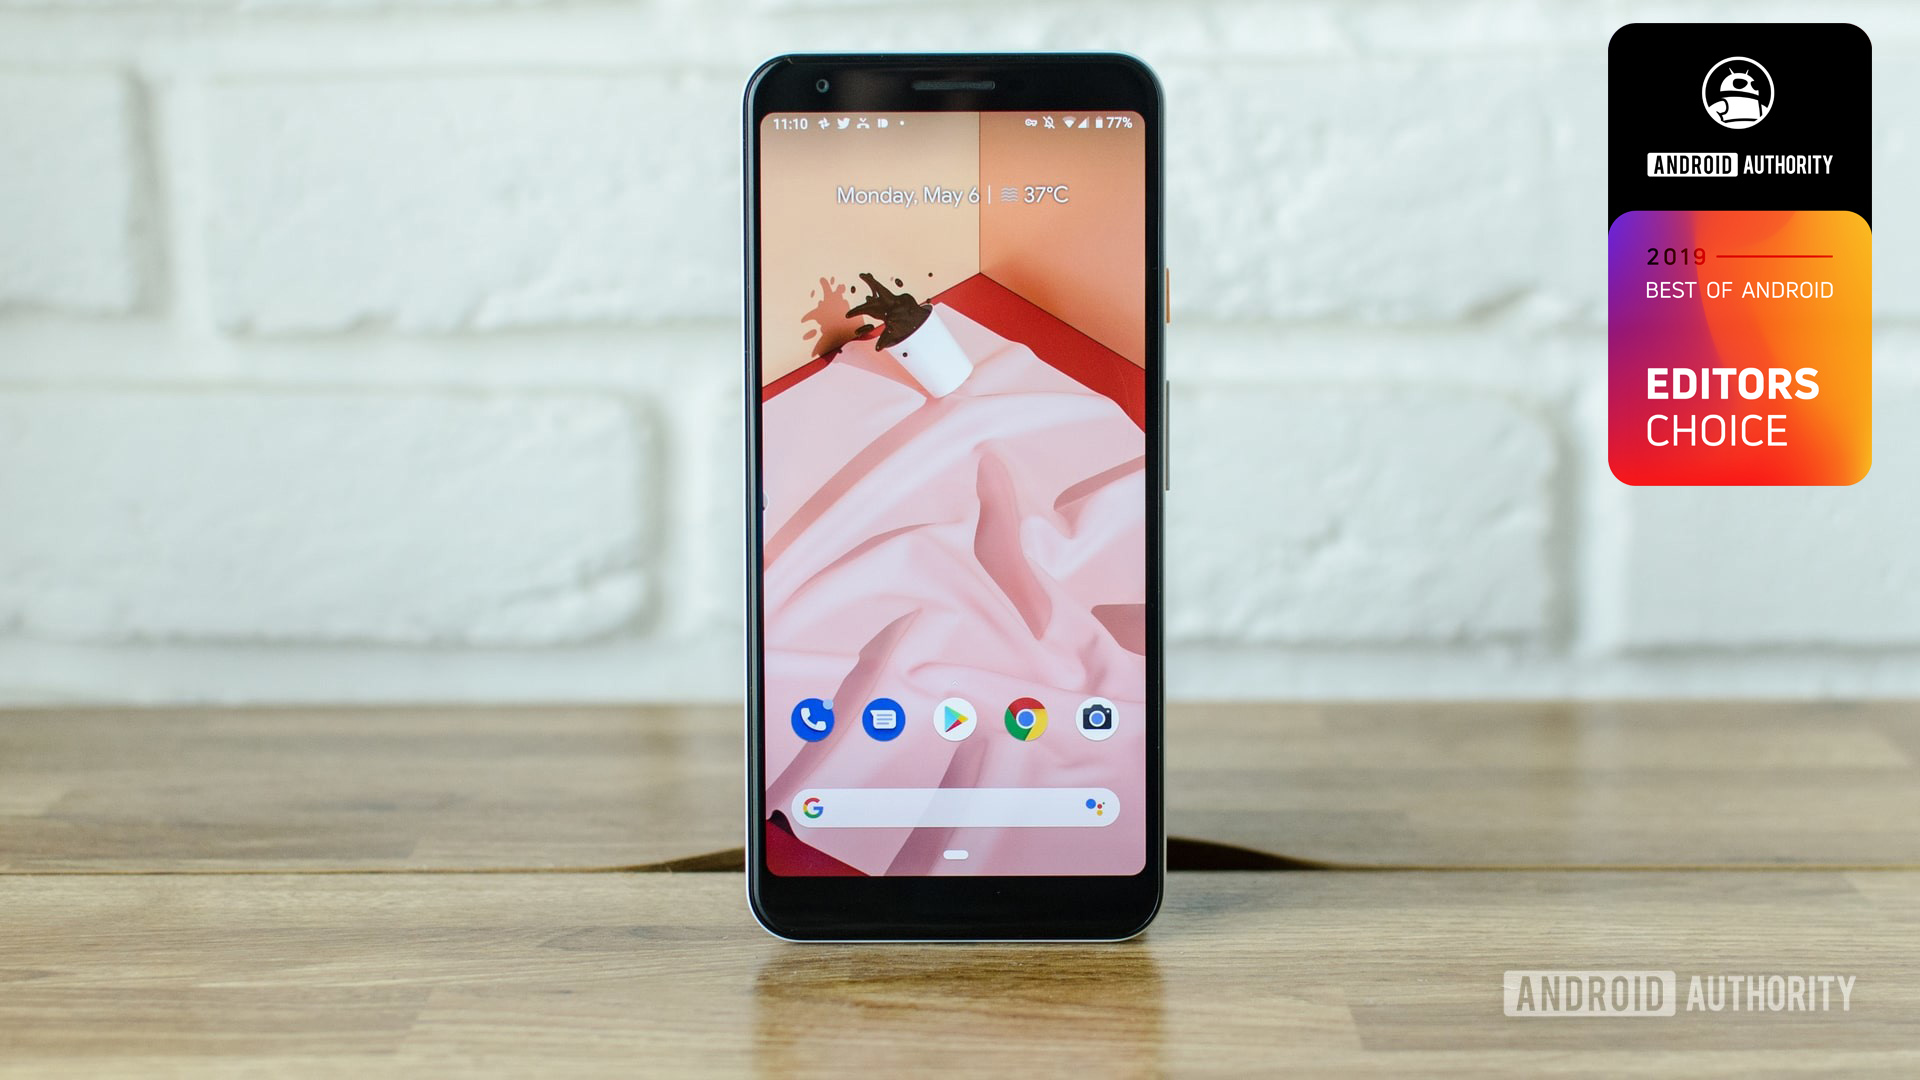 pixel 3a best of android editors choice 2019 copy